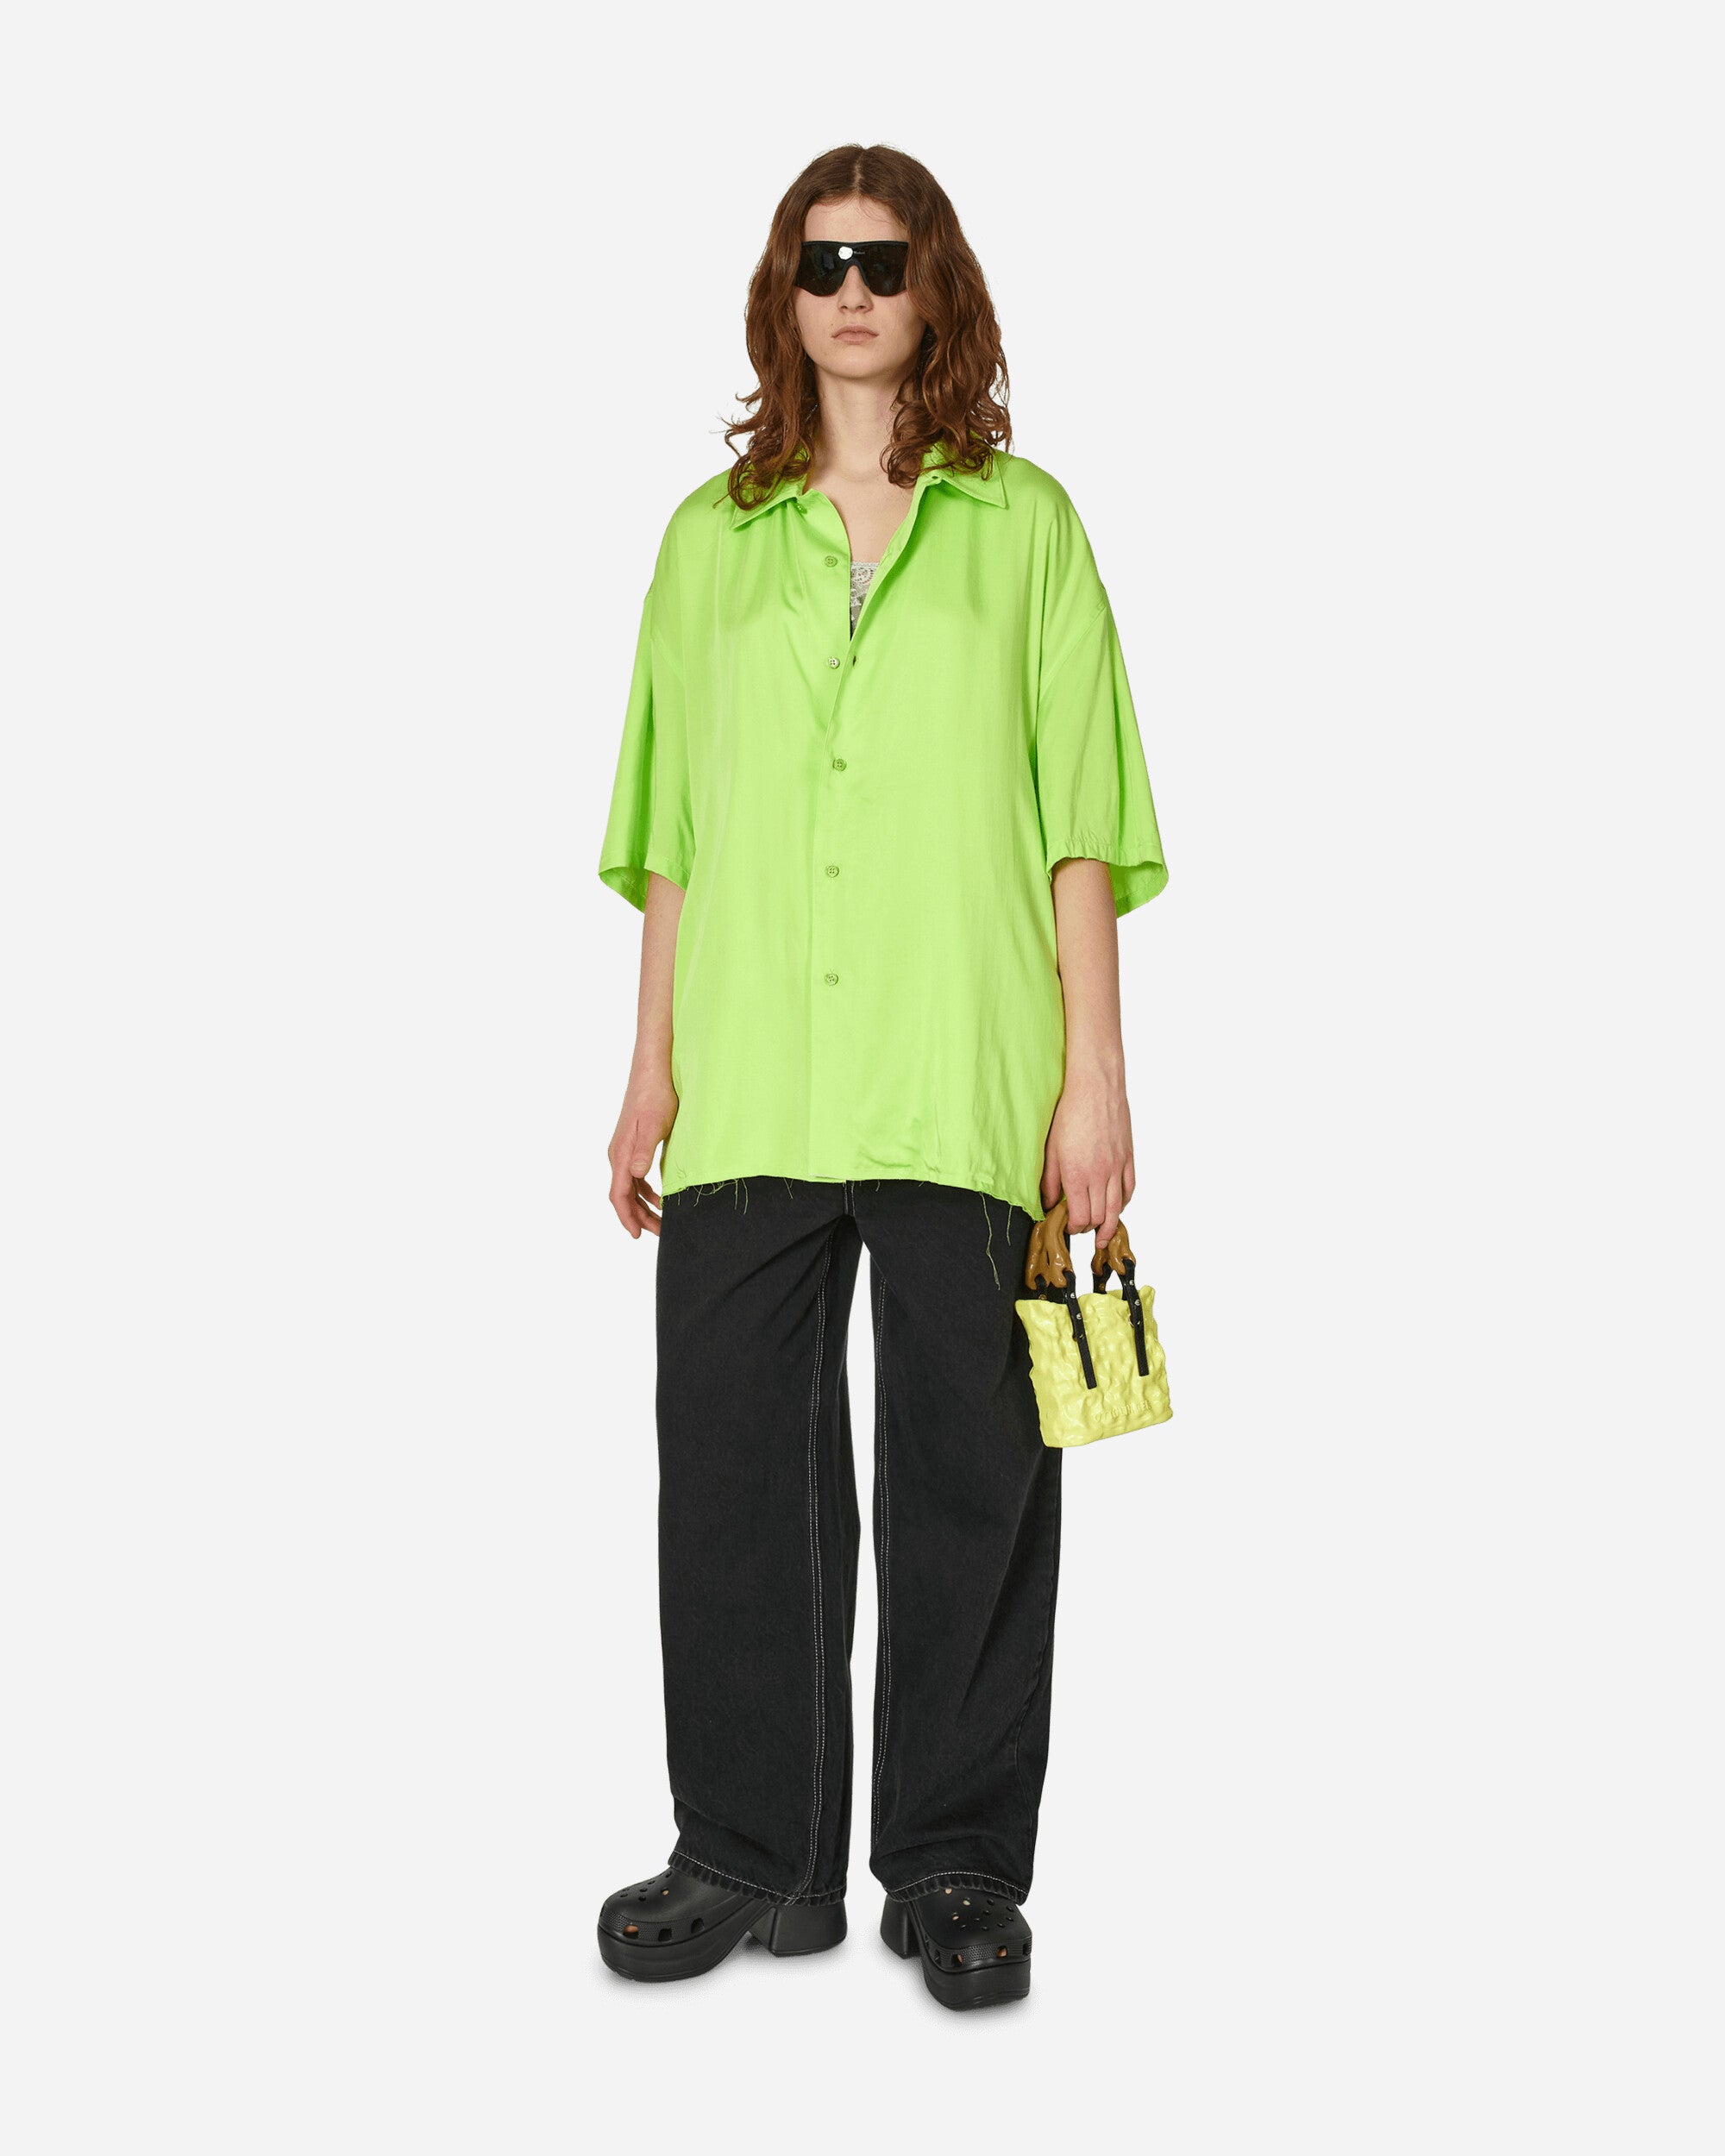 Camisole Shirt Lime / Irridescent